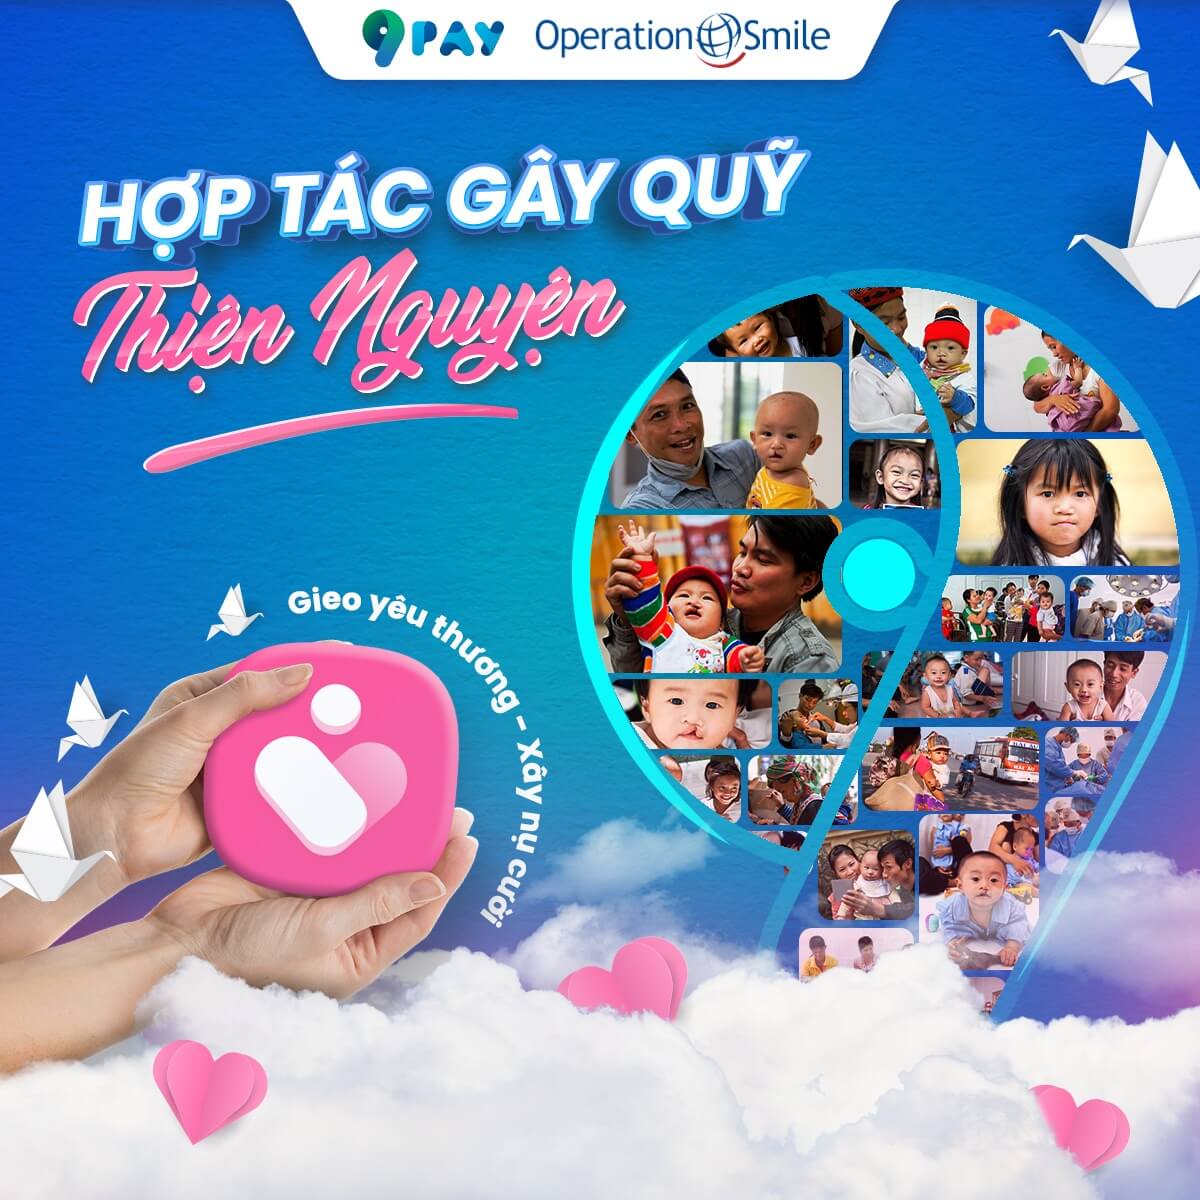 9pay-dong-hanh-cung-quy-operation-smile-trong-hanh-trinh-gieo-yeu-thuong-xay-nu-cuoi